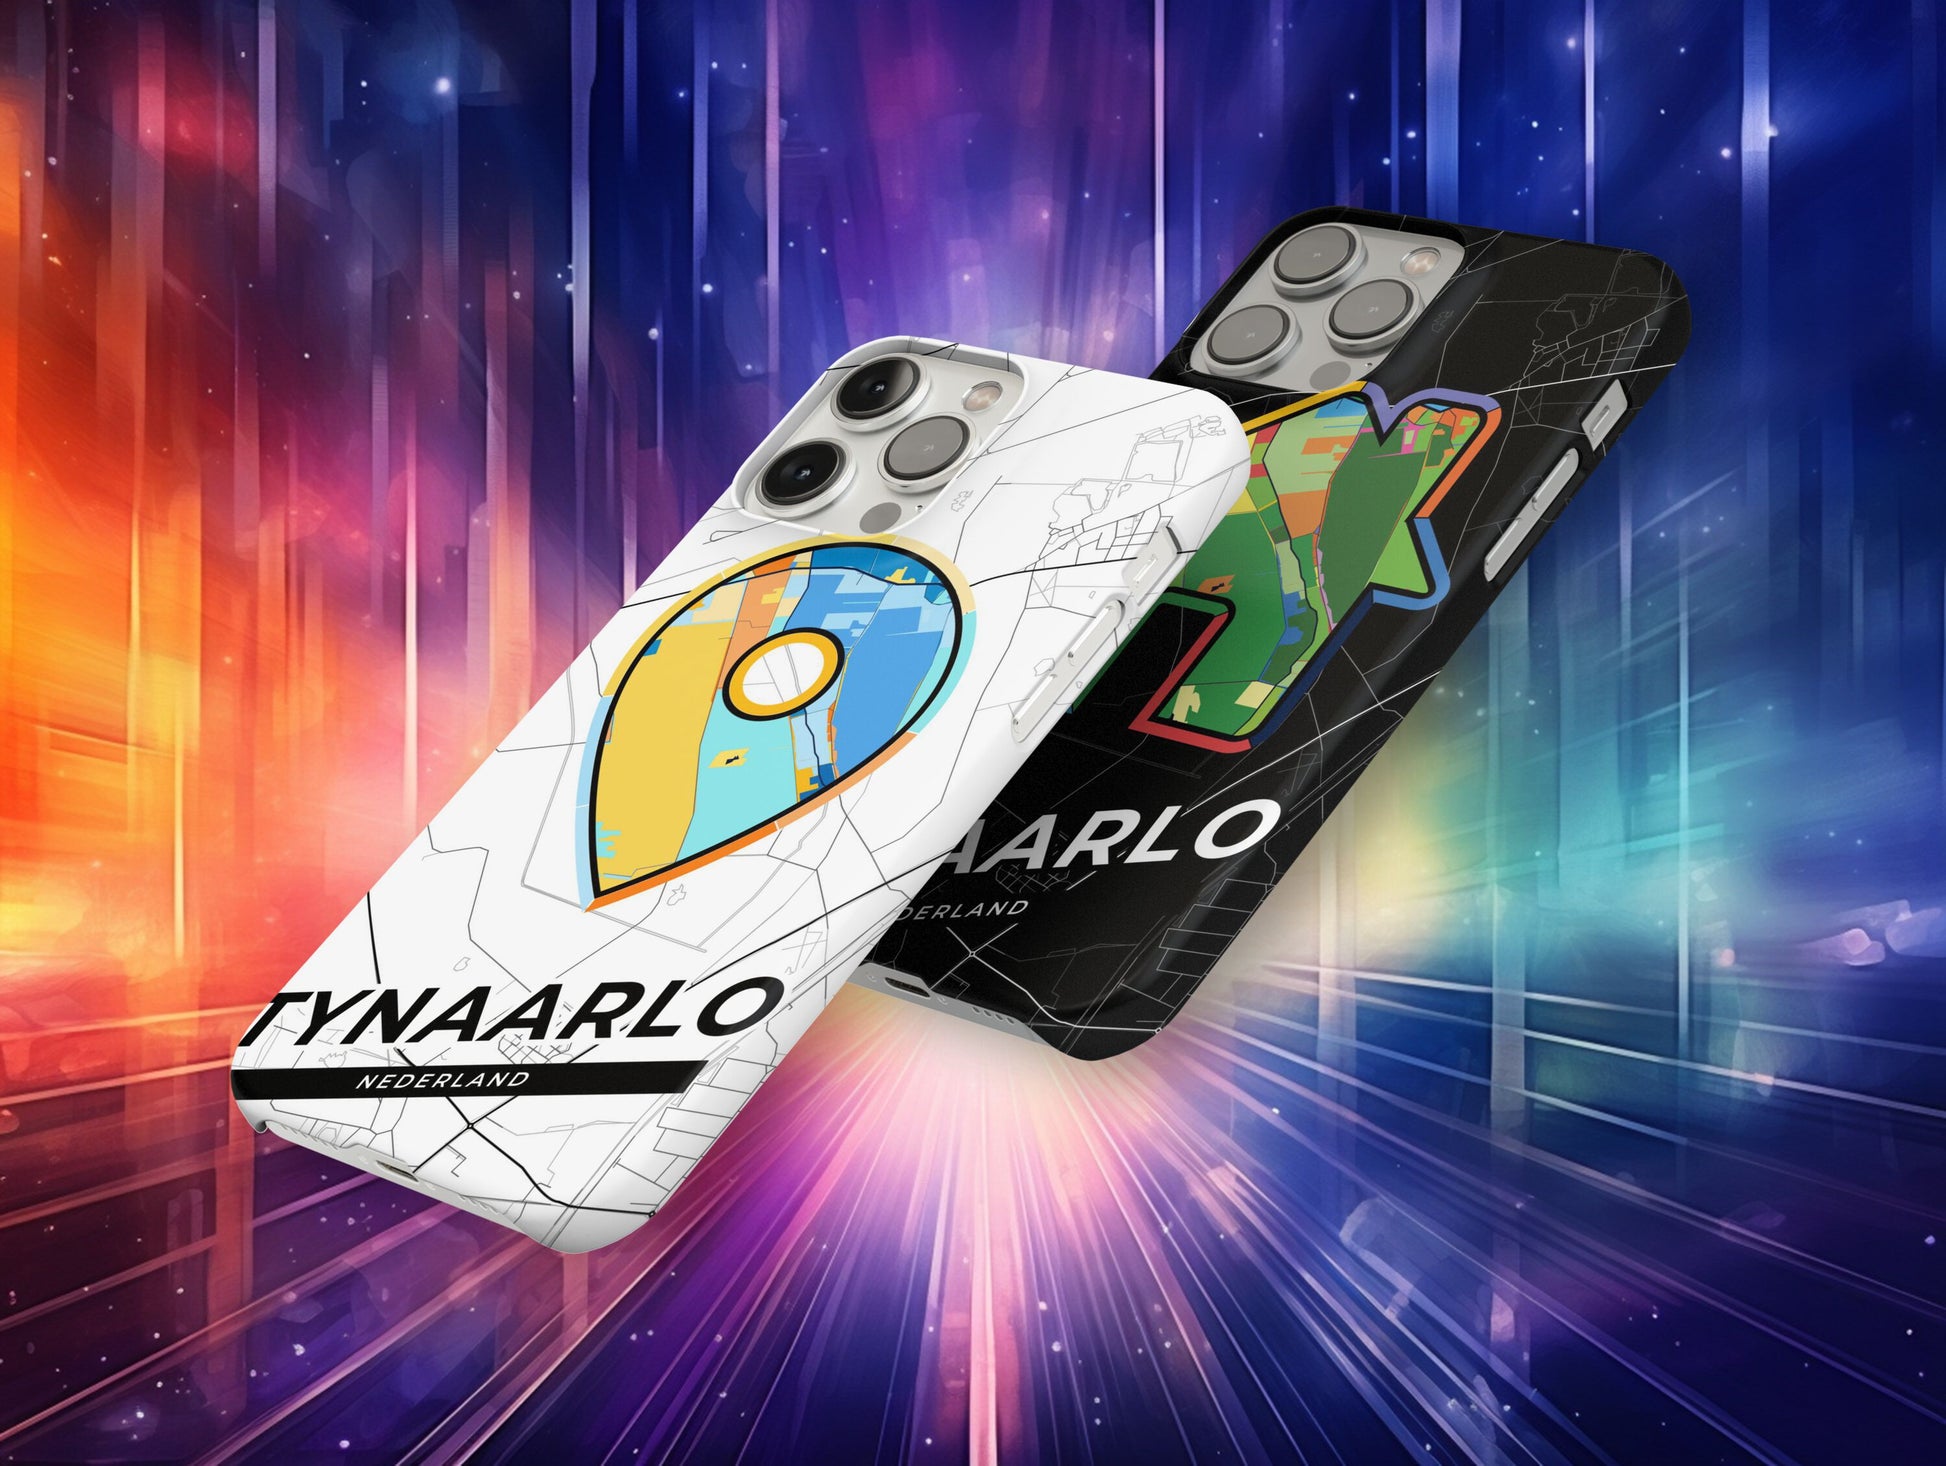 Tynaarlo Netherlands slim phone case with colorful icon